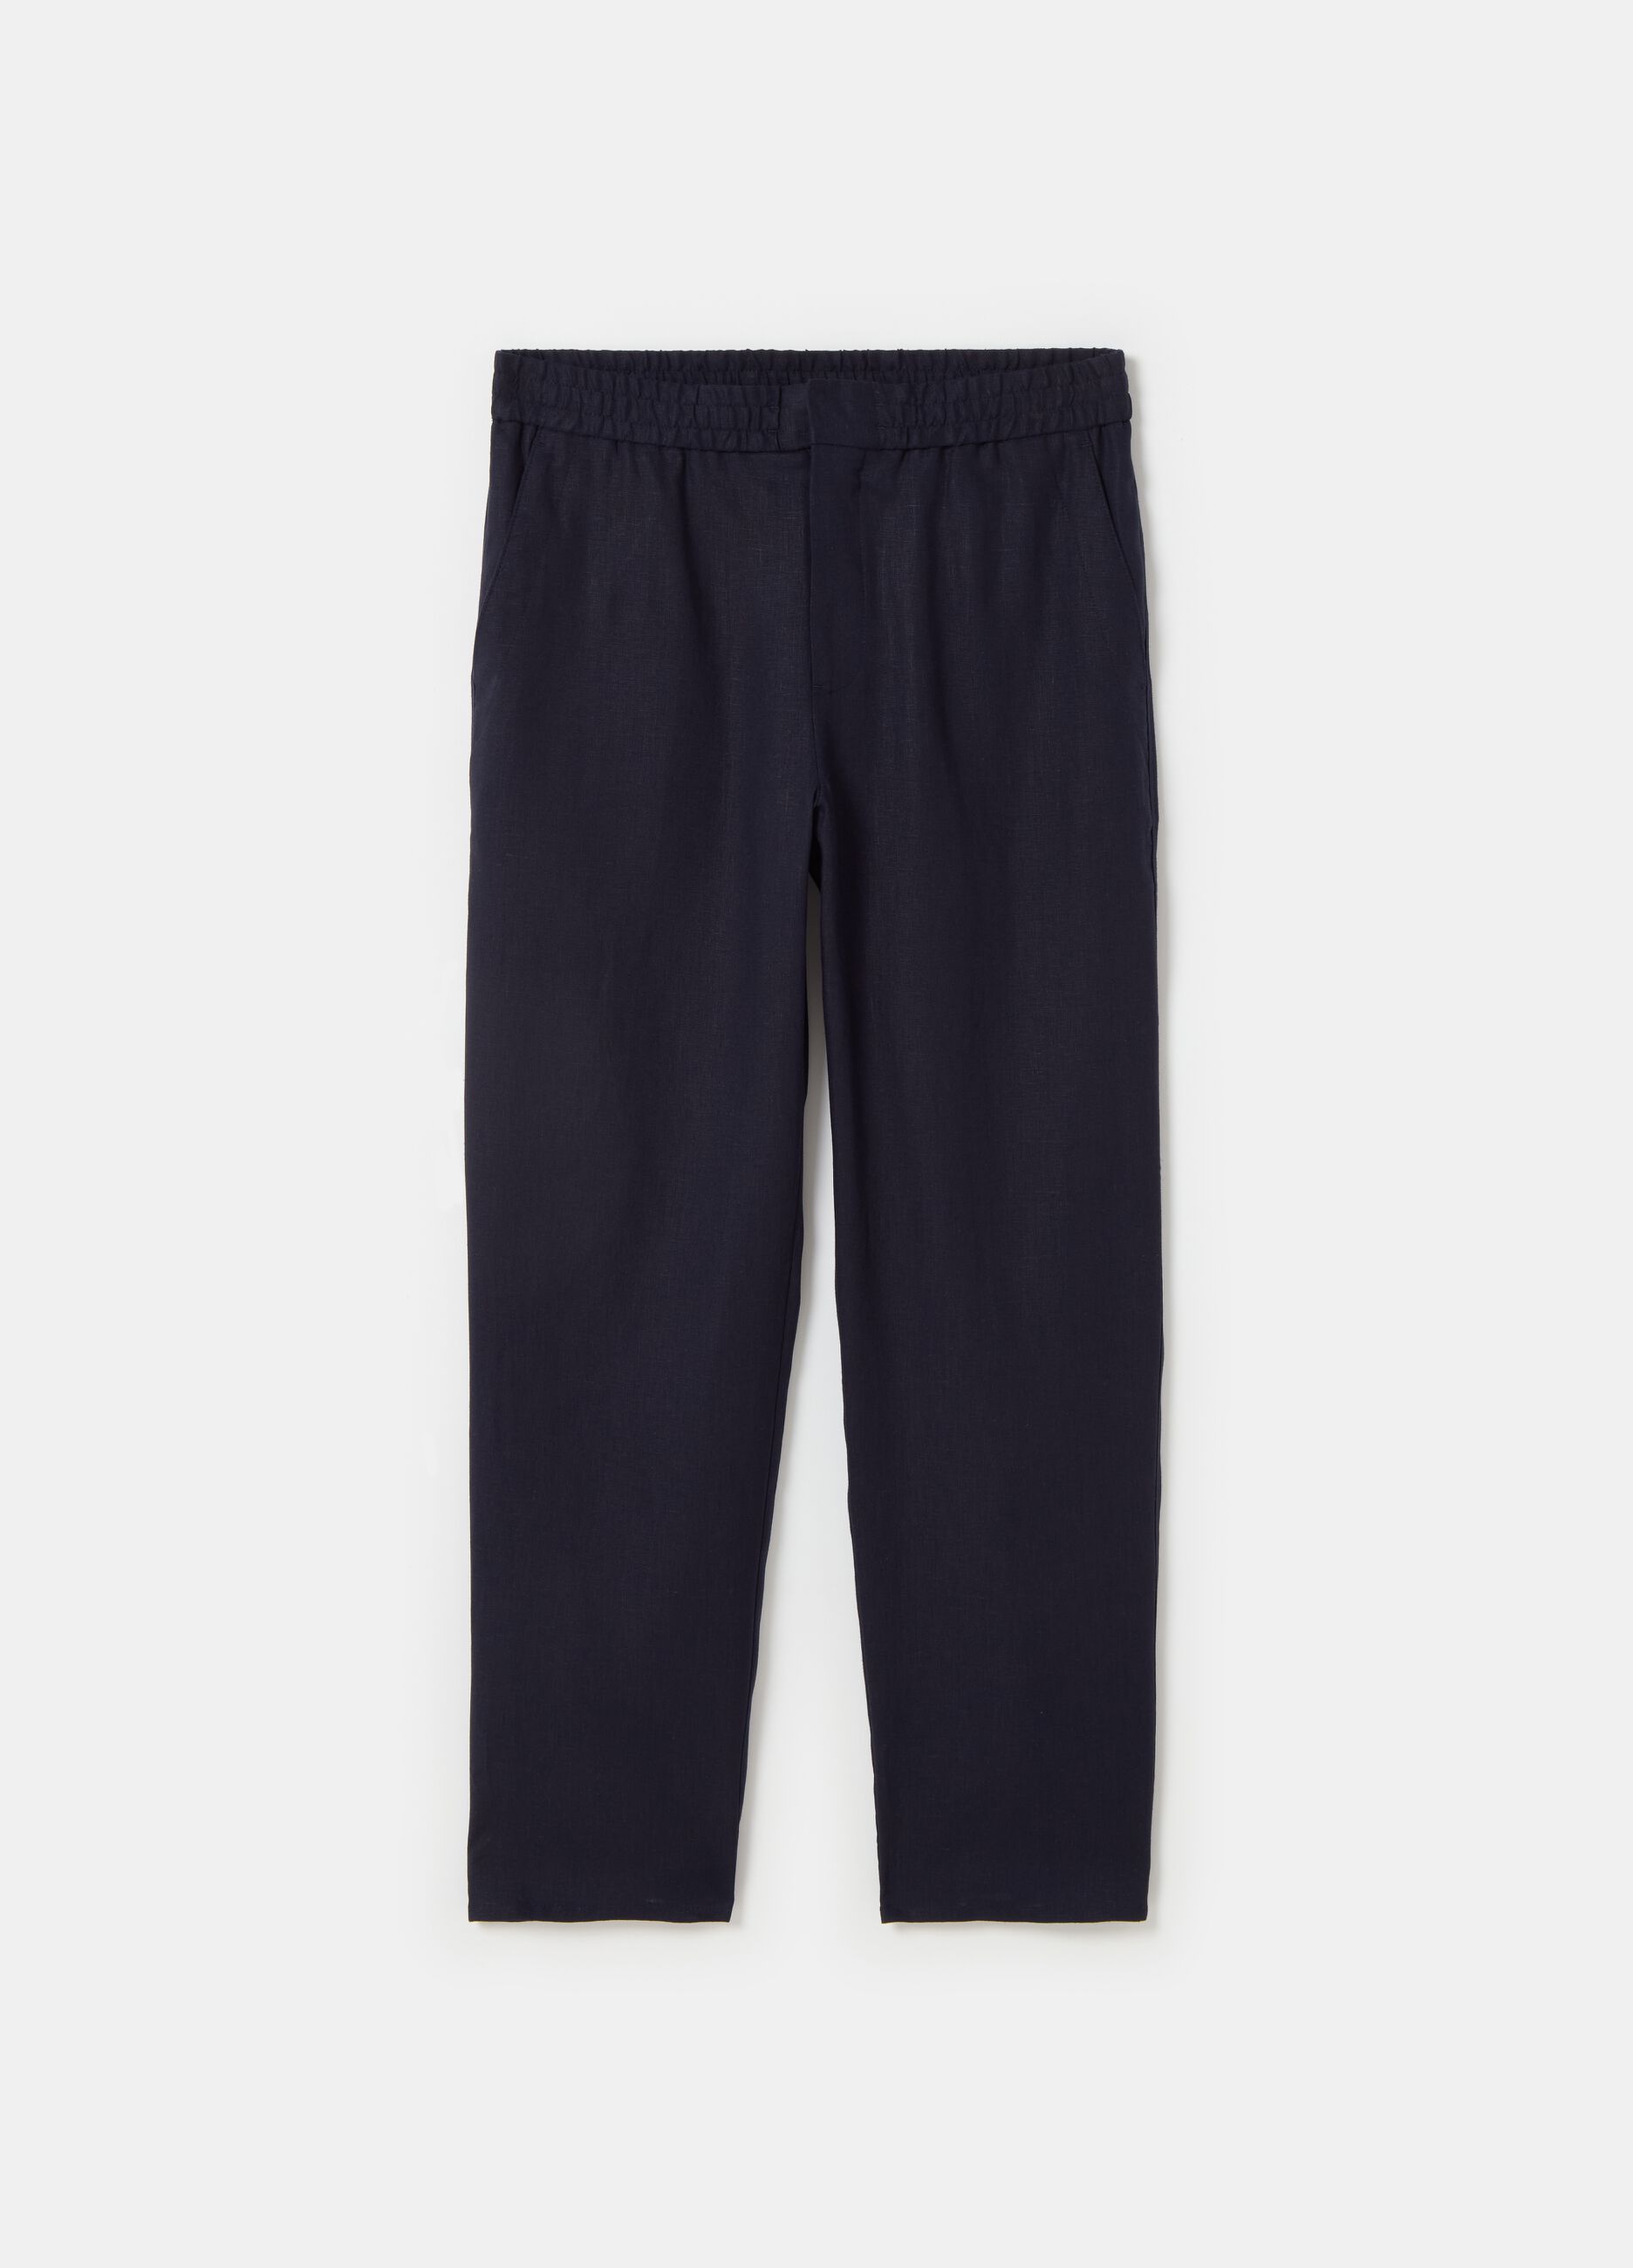 Contemporary trousers in linen